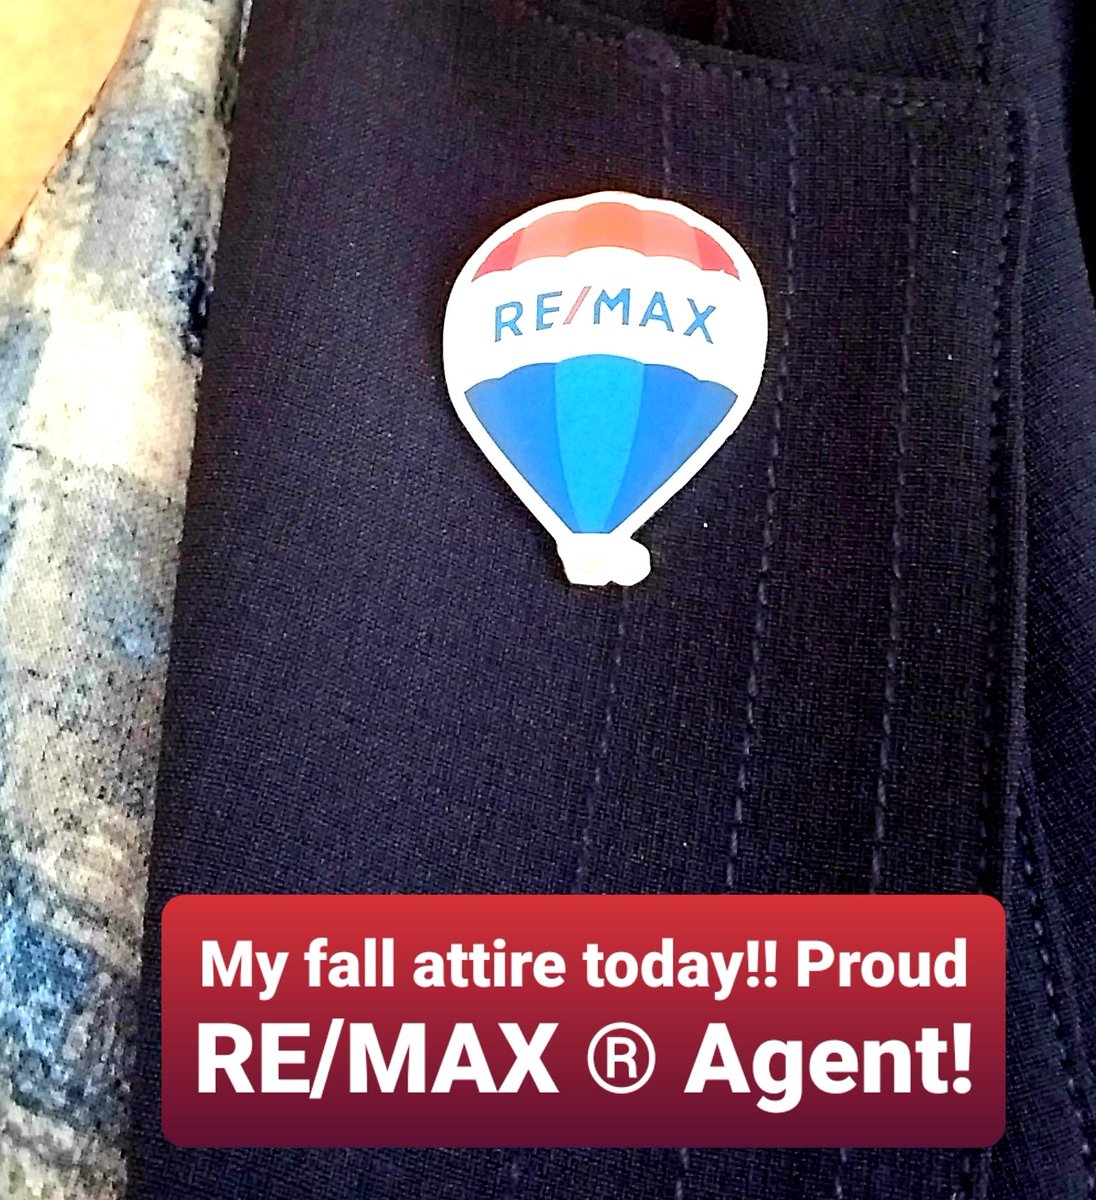 Fall is in the air... Blazer and a
RE/MAX ® pin for this agent on duty today !!
#sellingNL #falldaysstillworking
#professionallydressed
#remaxagentonduty #reginarussell